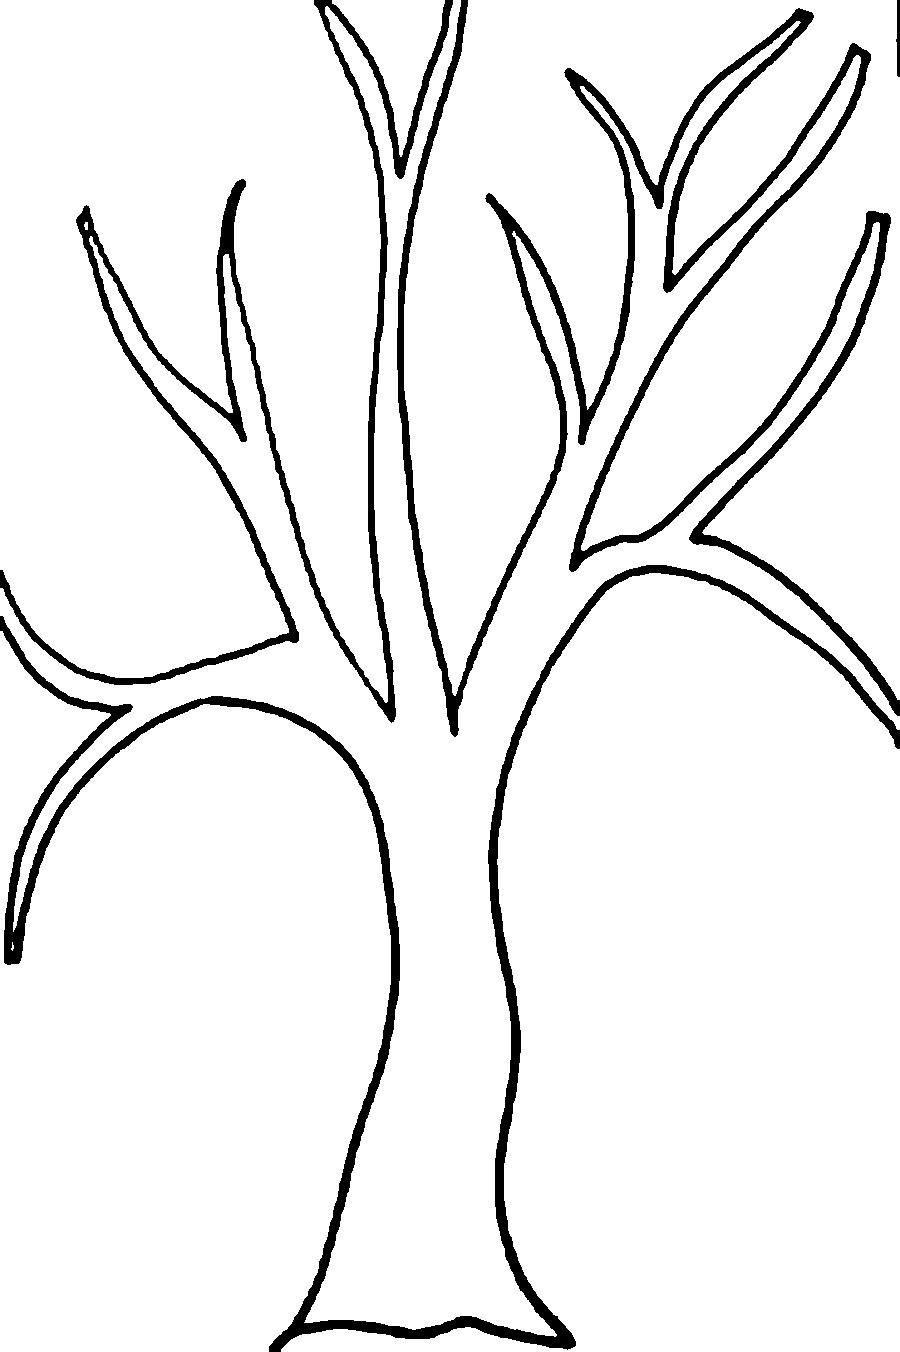 Coloring Trees without leaves 